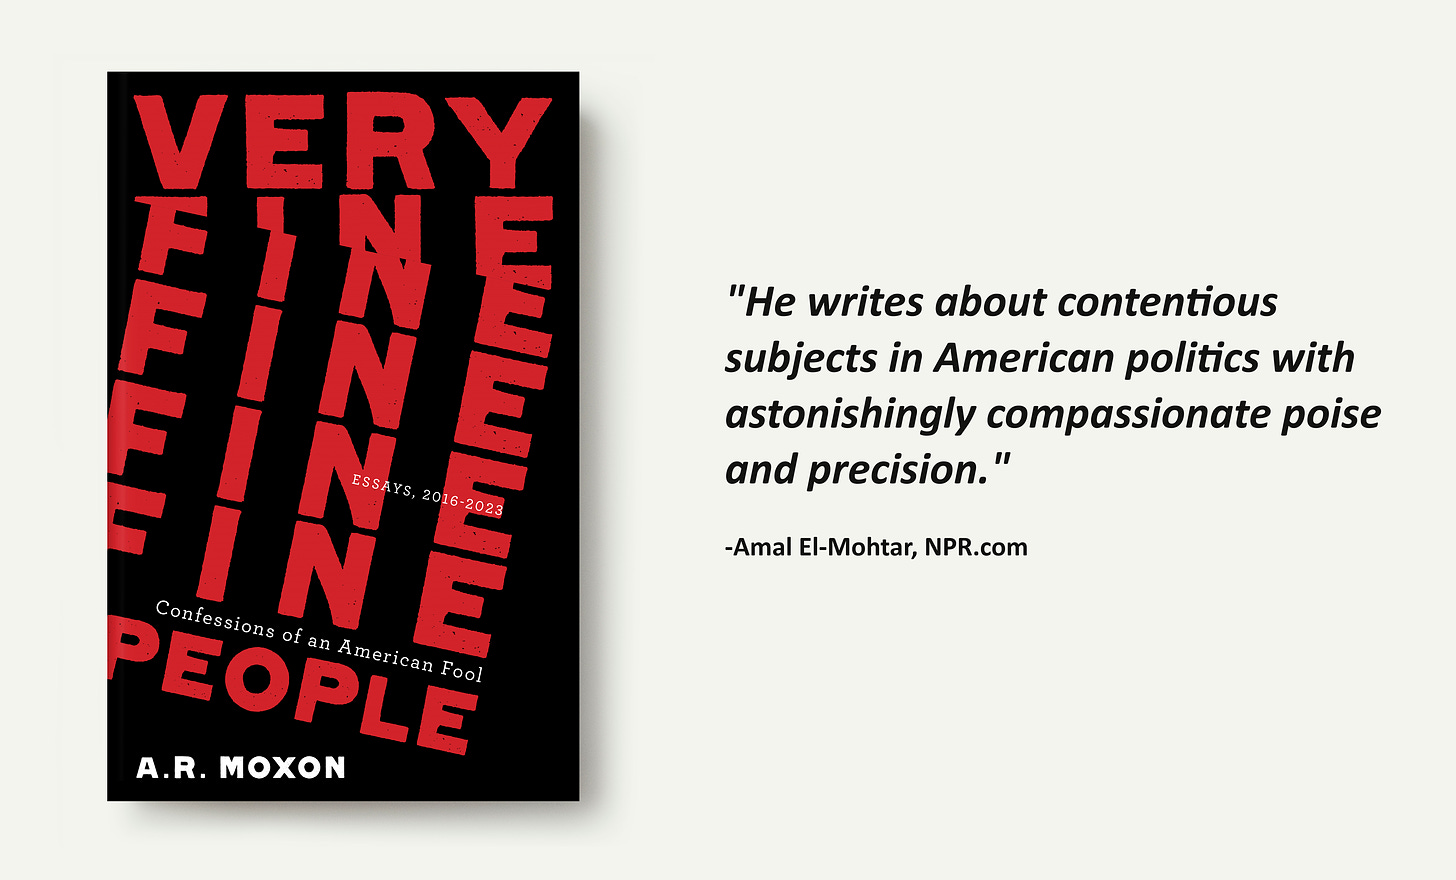 "He writes about contentious subjects in American politics with astonishingly compassionate poise and precision." -NPR